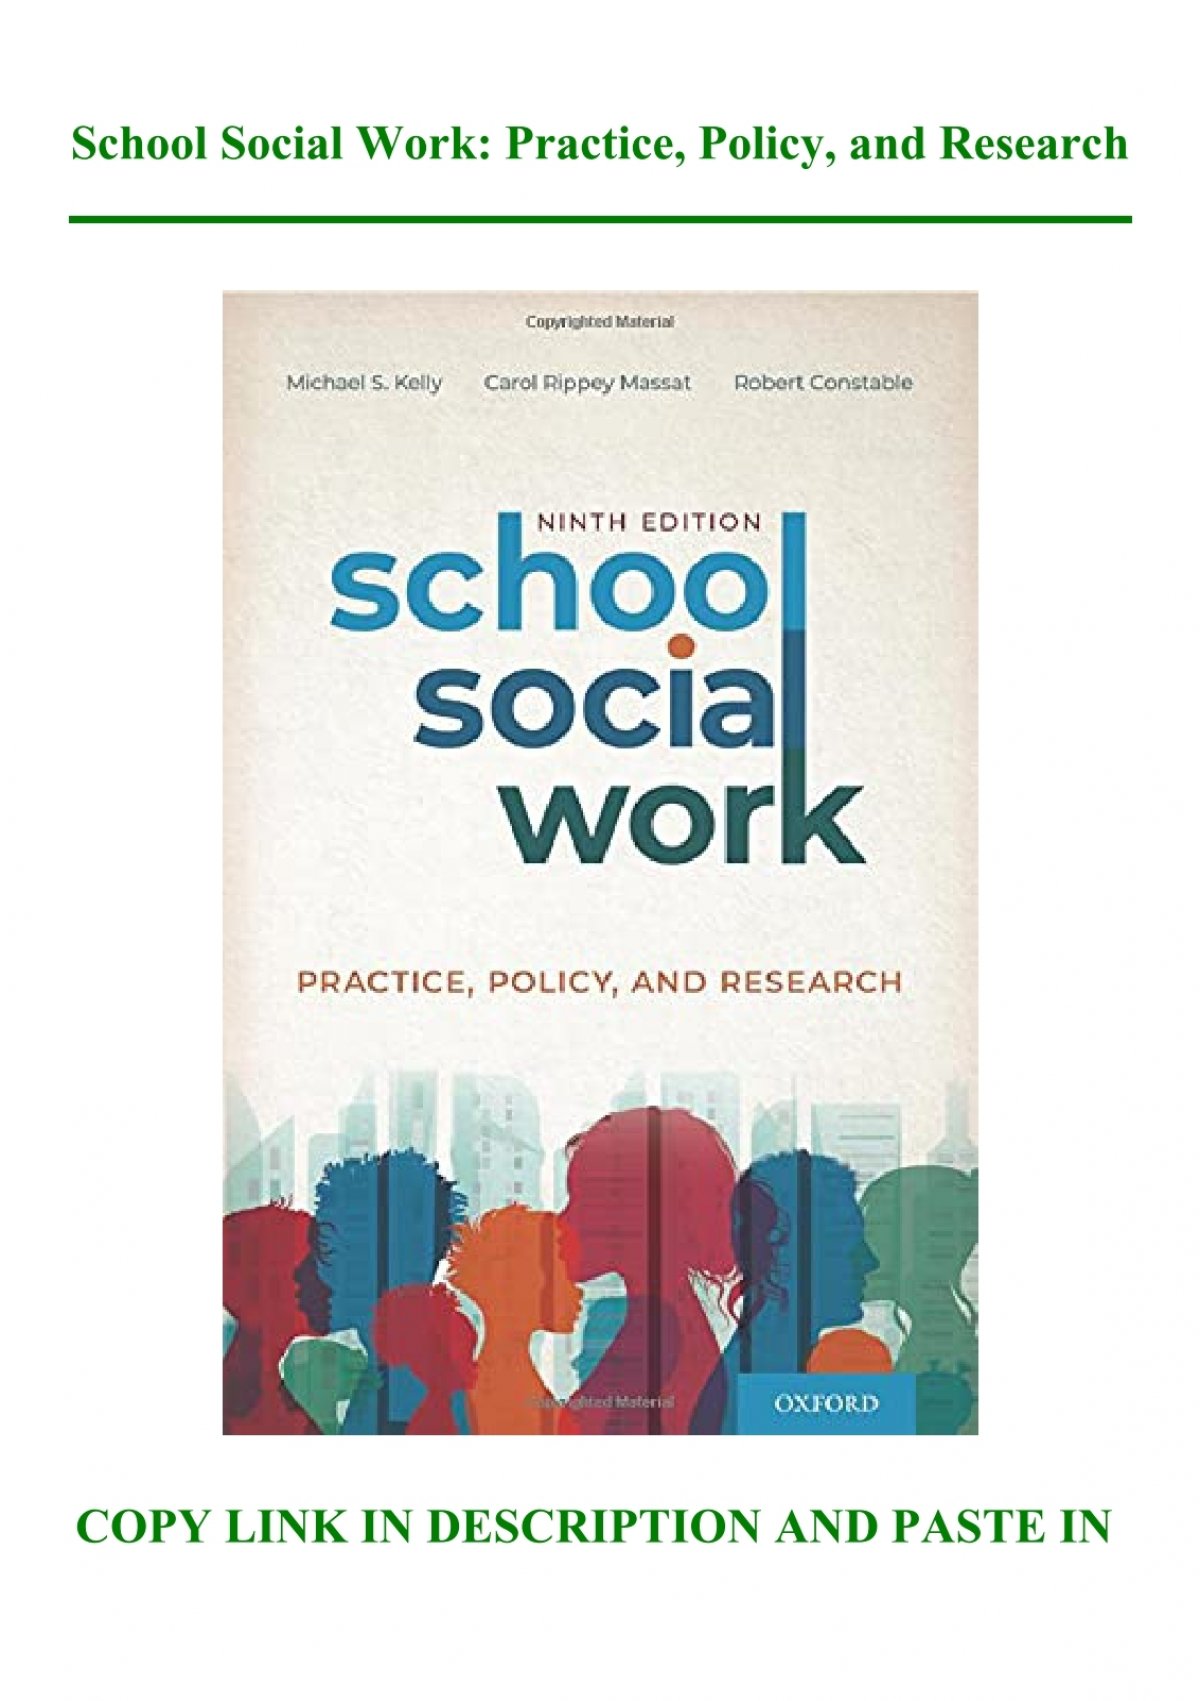 school social work practice policy and research 9th edition pdf